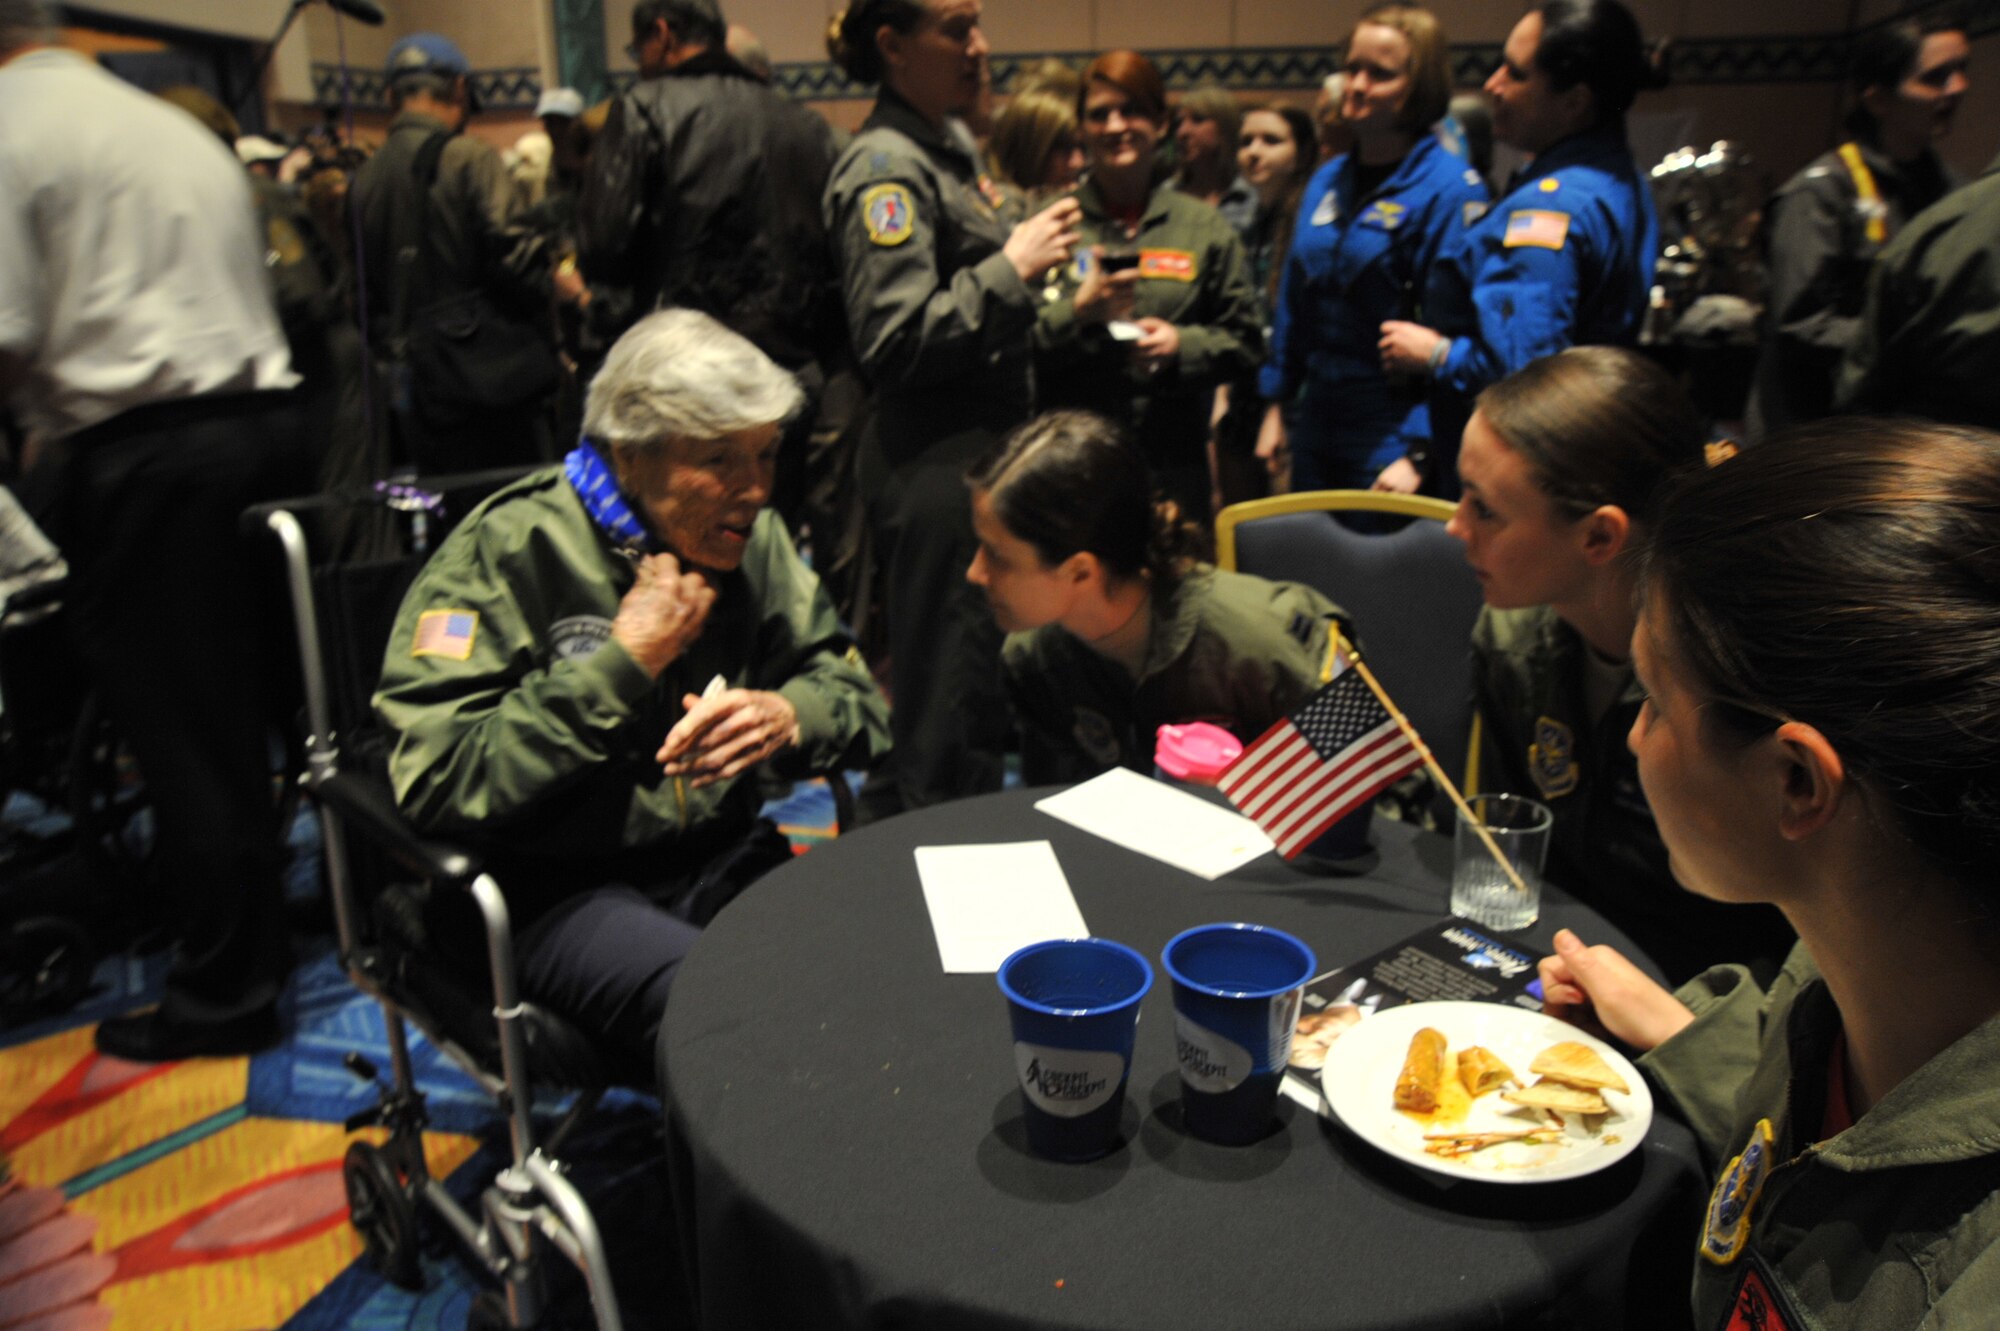 Capt. Rachel Quirarte, 349th Air Refueling Squadron KC-135 Stratotanker pilot, Staff Sgt. Danielle Warren, 344th ARS boom operator, and 1st Lt. Adria Trgovcich, 350th ARS navigator, sit with Dawn Seymour, a World War II Women Airforce Service Pilot, at the Women Military Aviators flight suit social during the Women in Aviation Conference March 3, 2017 in Orlando, Fla. Seymour celebrated her 100th birthday this year and shared personal stories to members of Team McConnell. (U.S. Air Force photo/2nd Lt. Carla Stefaniak)